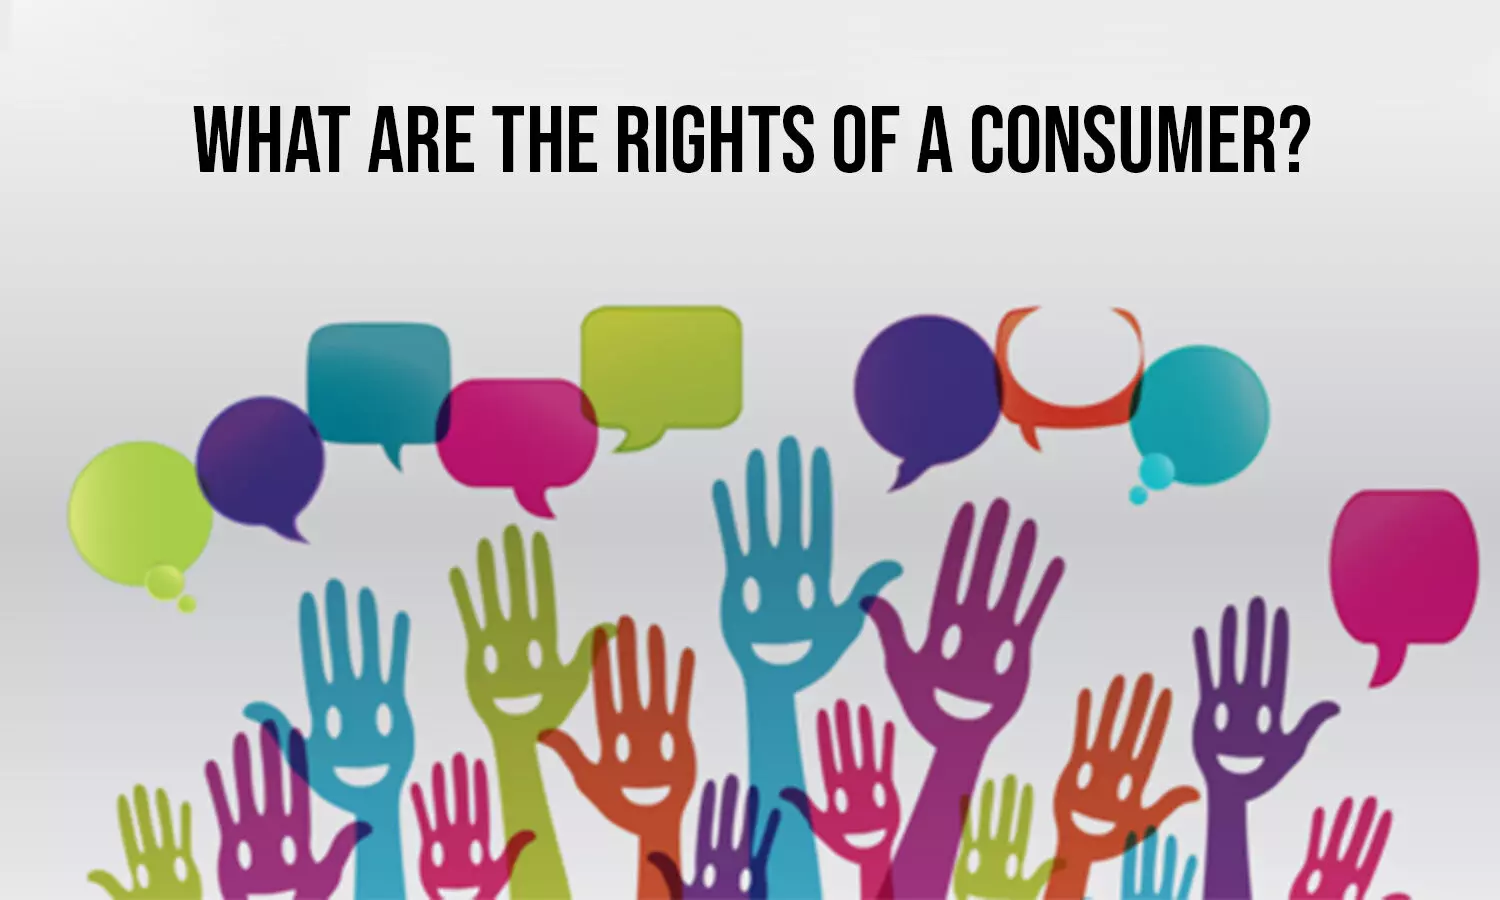 What are the rights of a consumer?